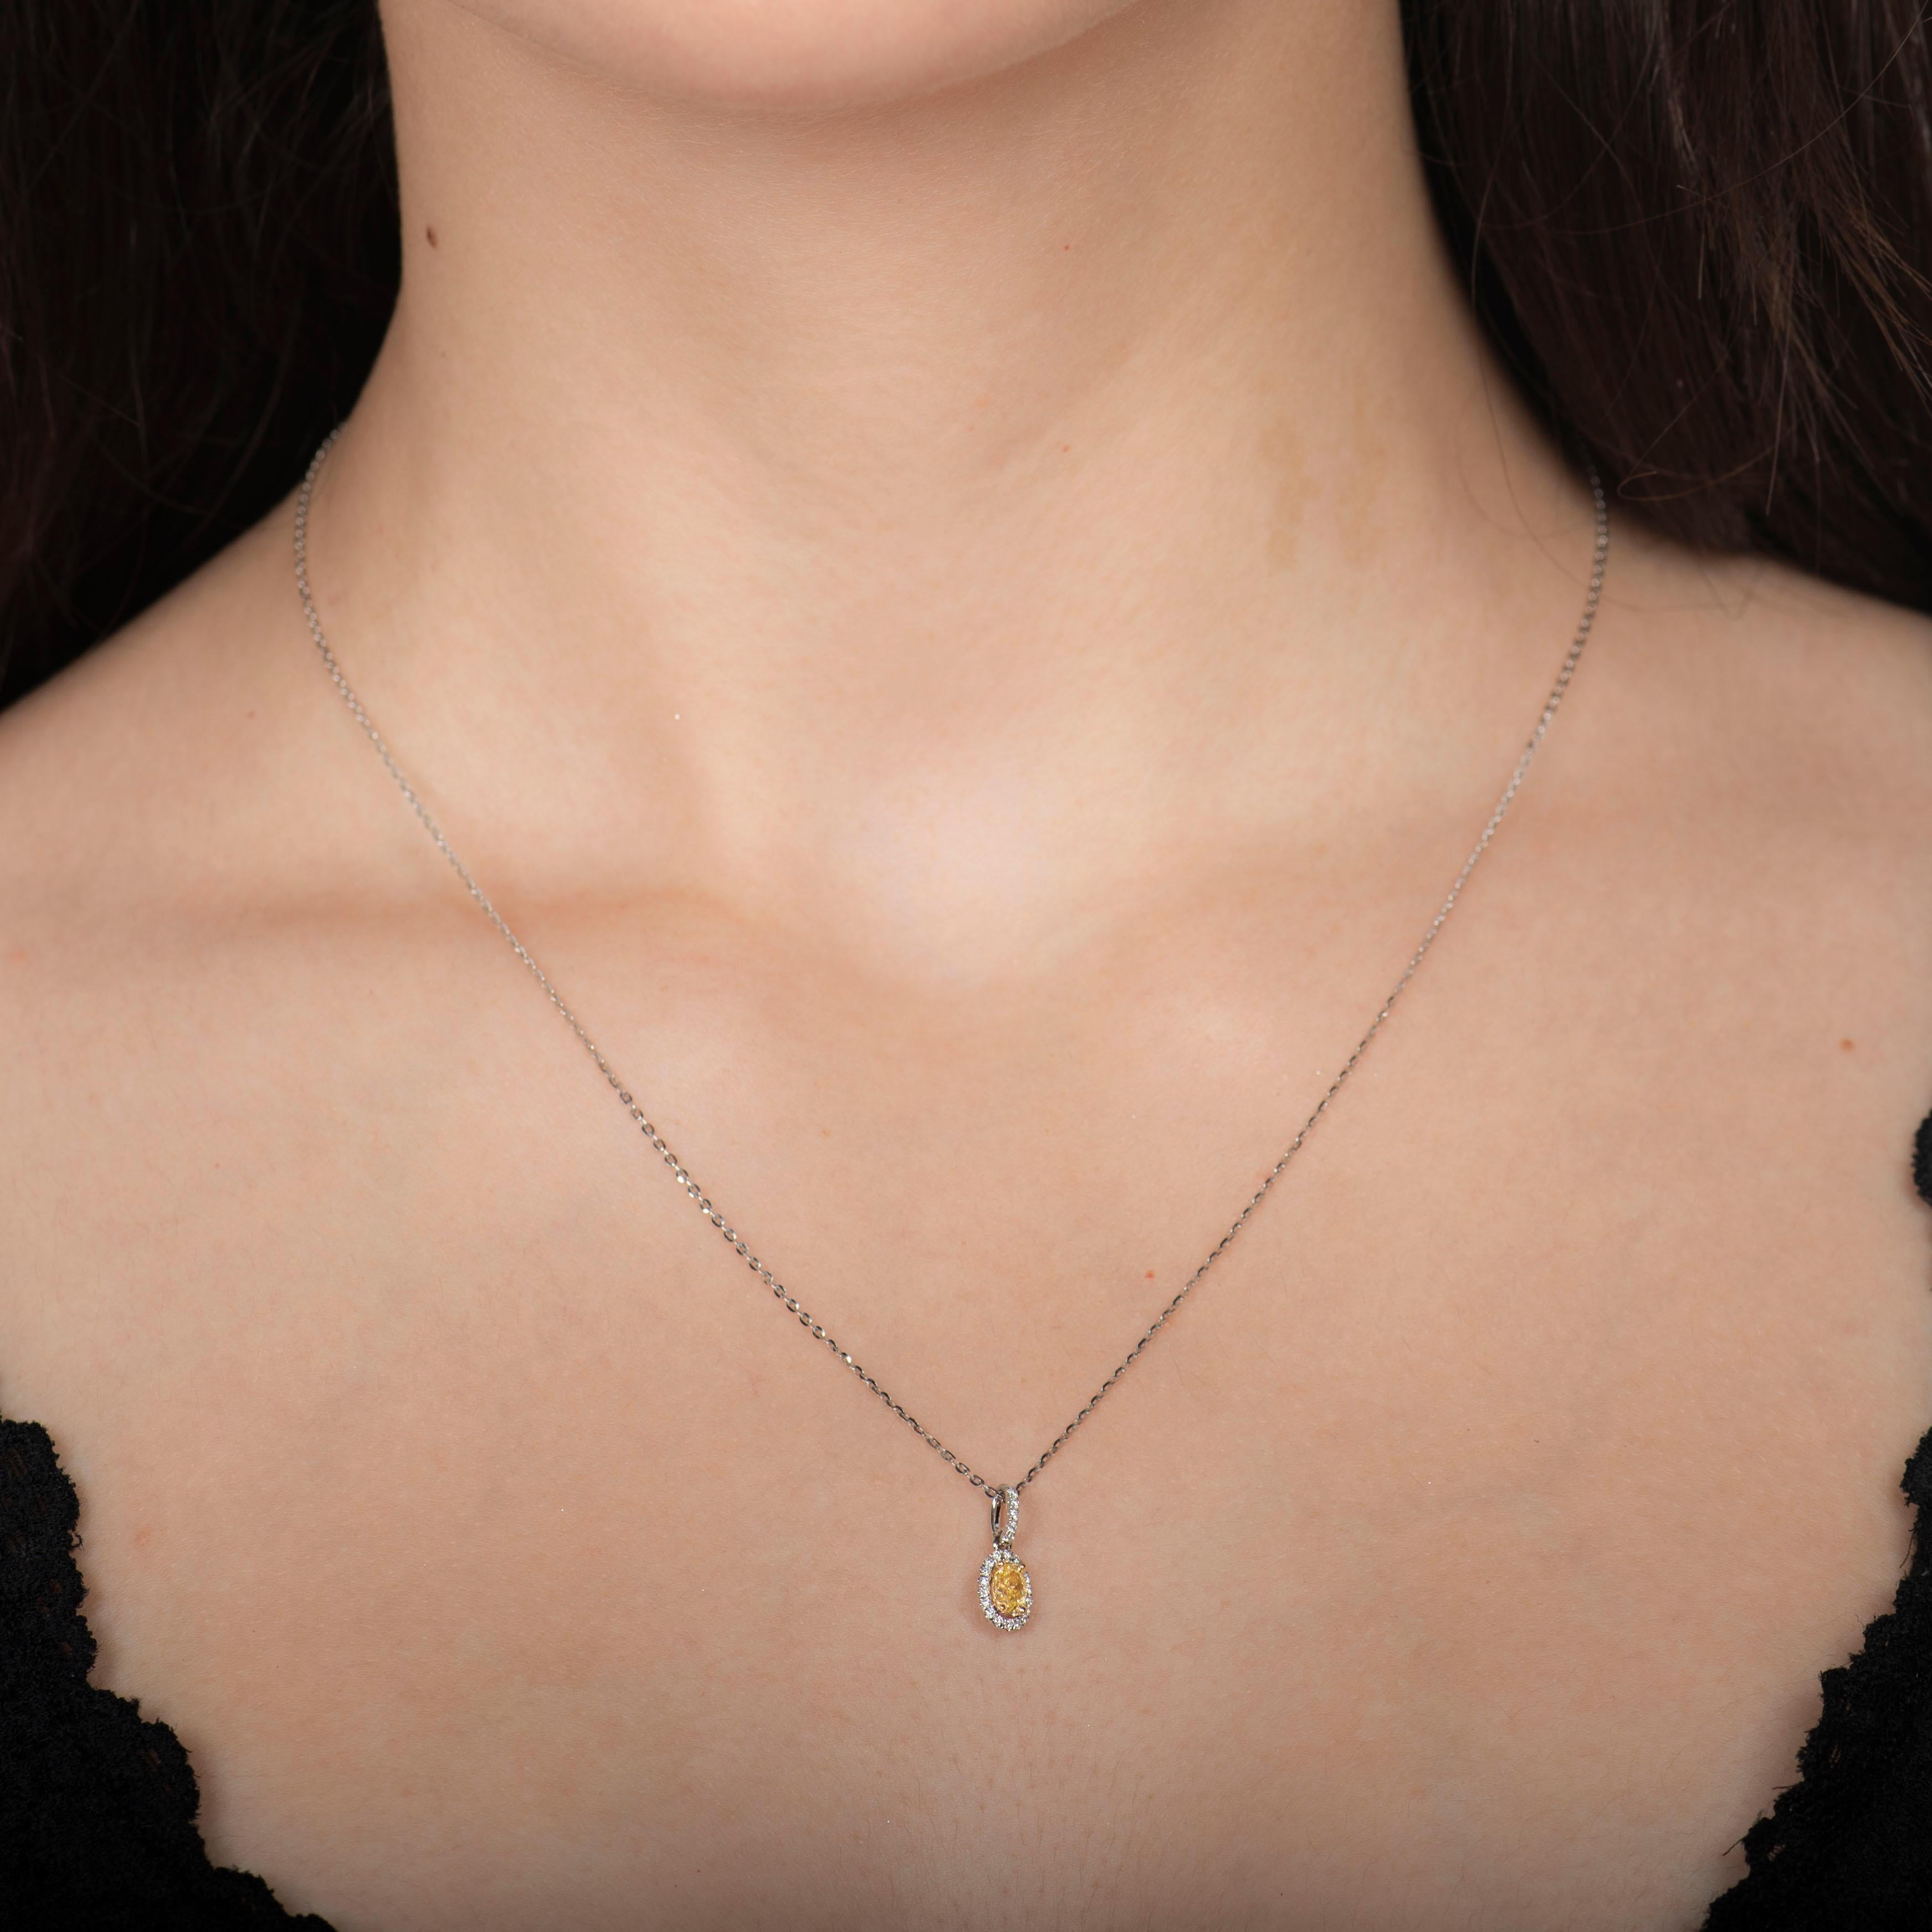 This 18kt white gold pendant features a 0.33ct natural yellow oval diamond set in 18kt yellow gold prongs. The surrounding round brilliant cut diamonds have a 0.10ct total weight, including a diamond accented bail. The pendant is simplistic but adds